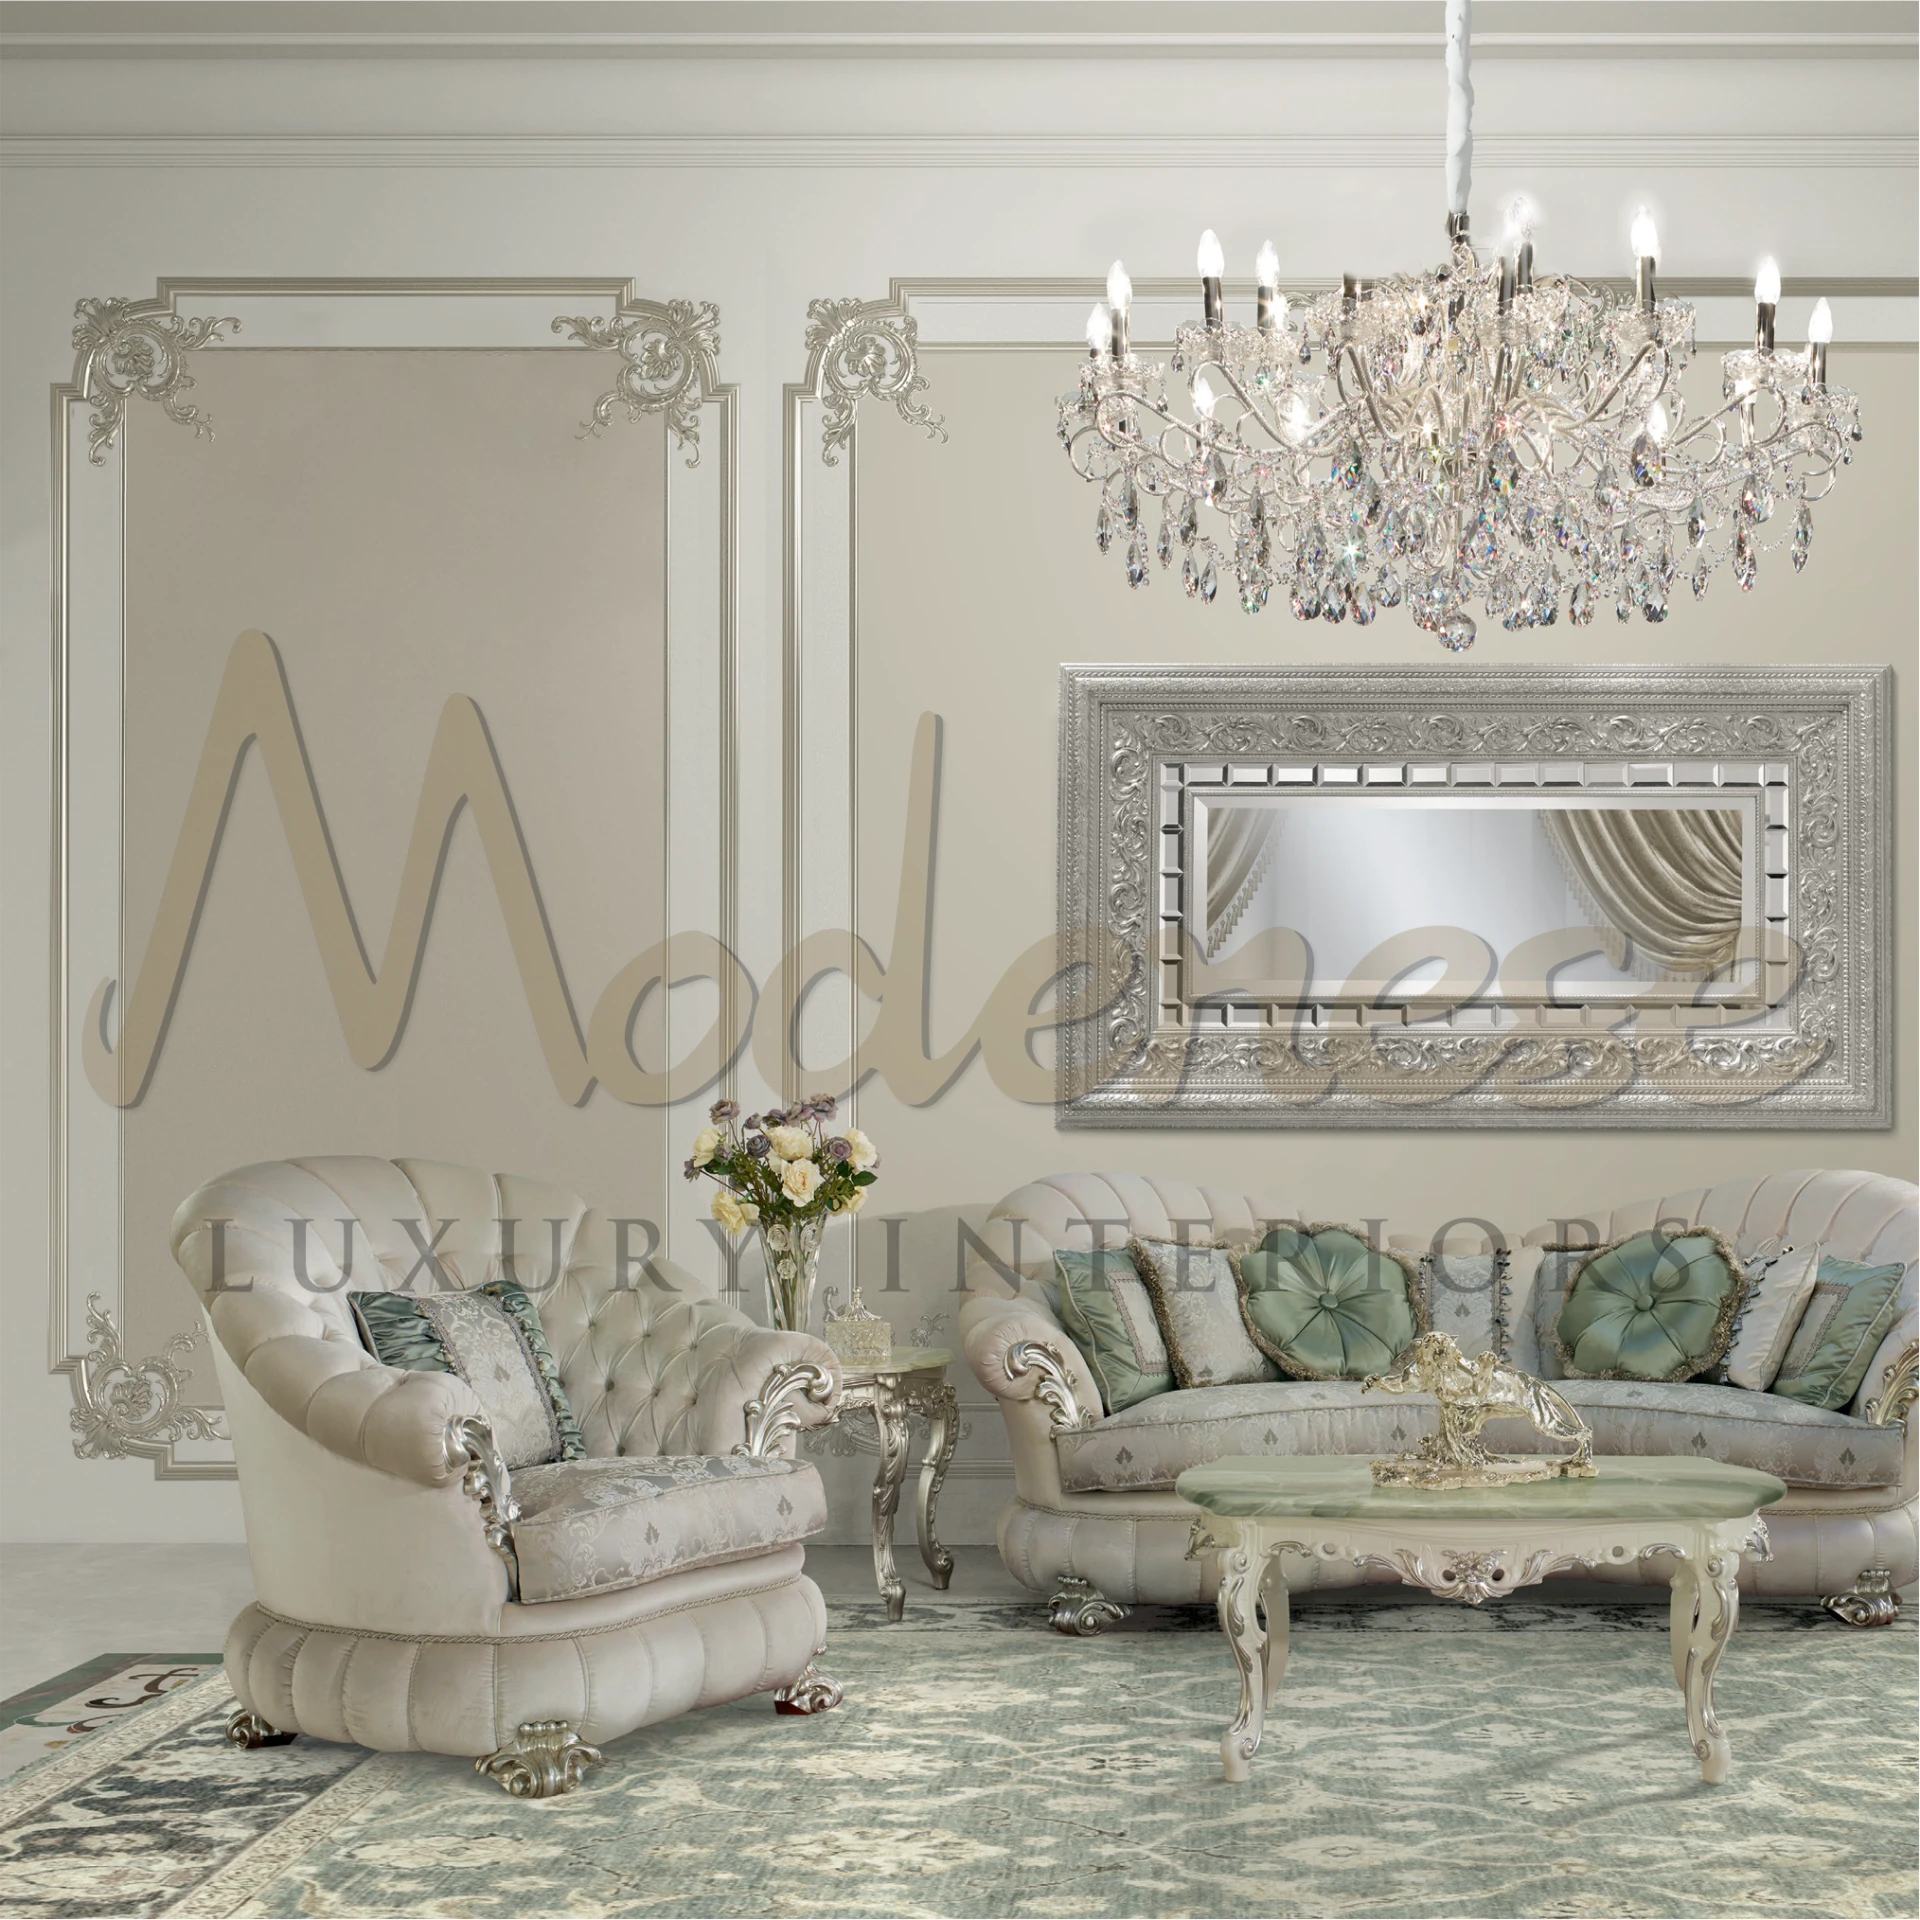 Stunning Designer Pillow in an opulent room setting, becoming the centerpiece of decor and symbolizing sophisticated beauty.